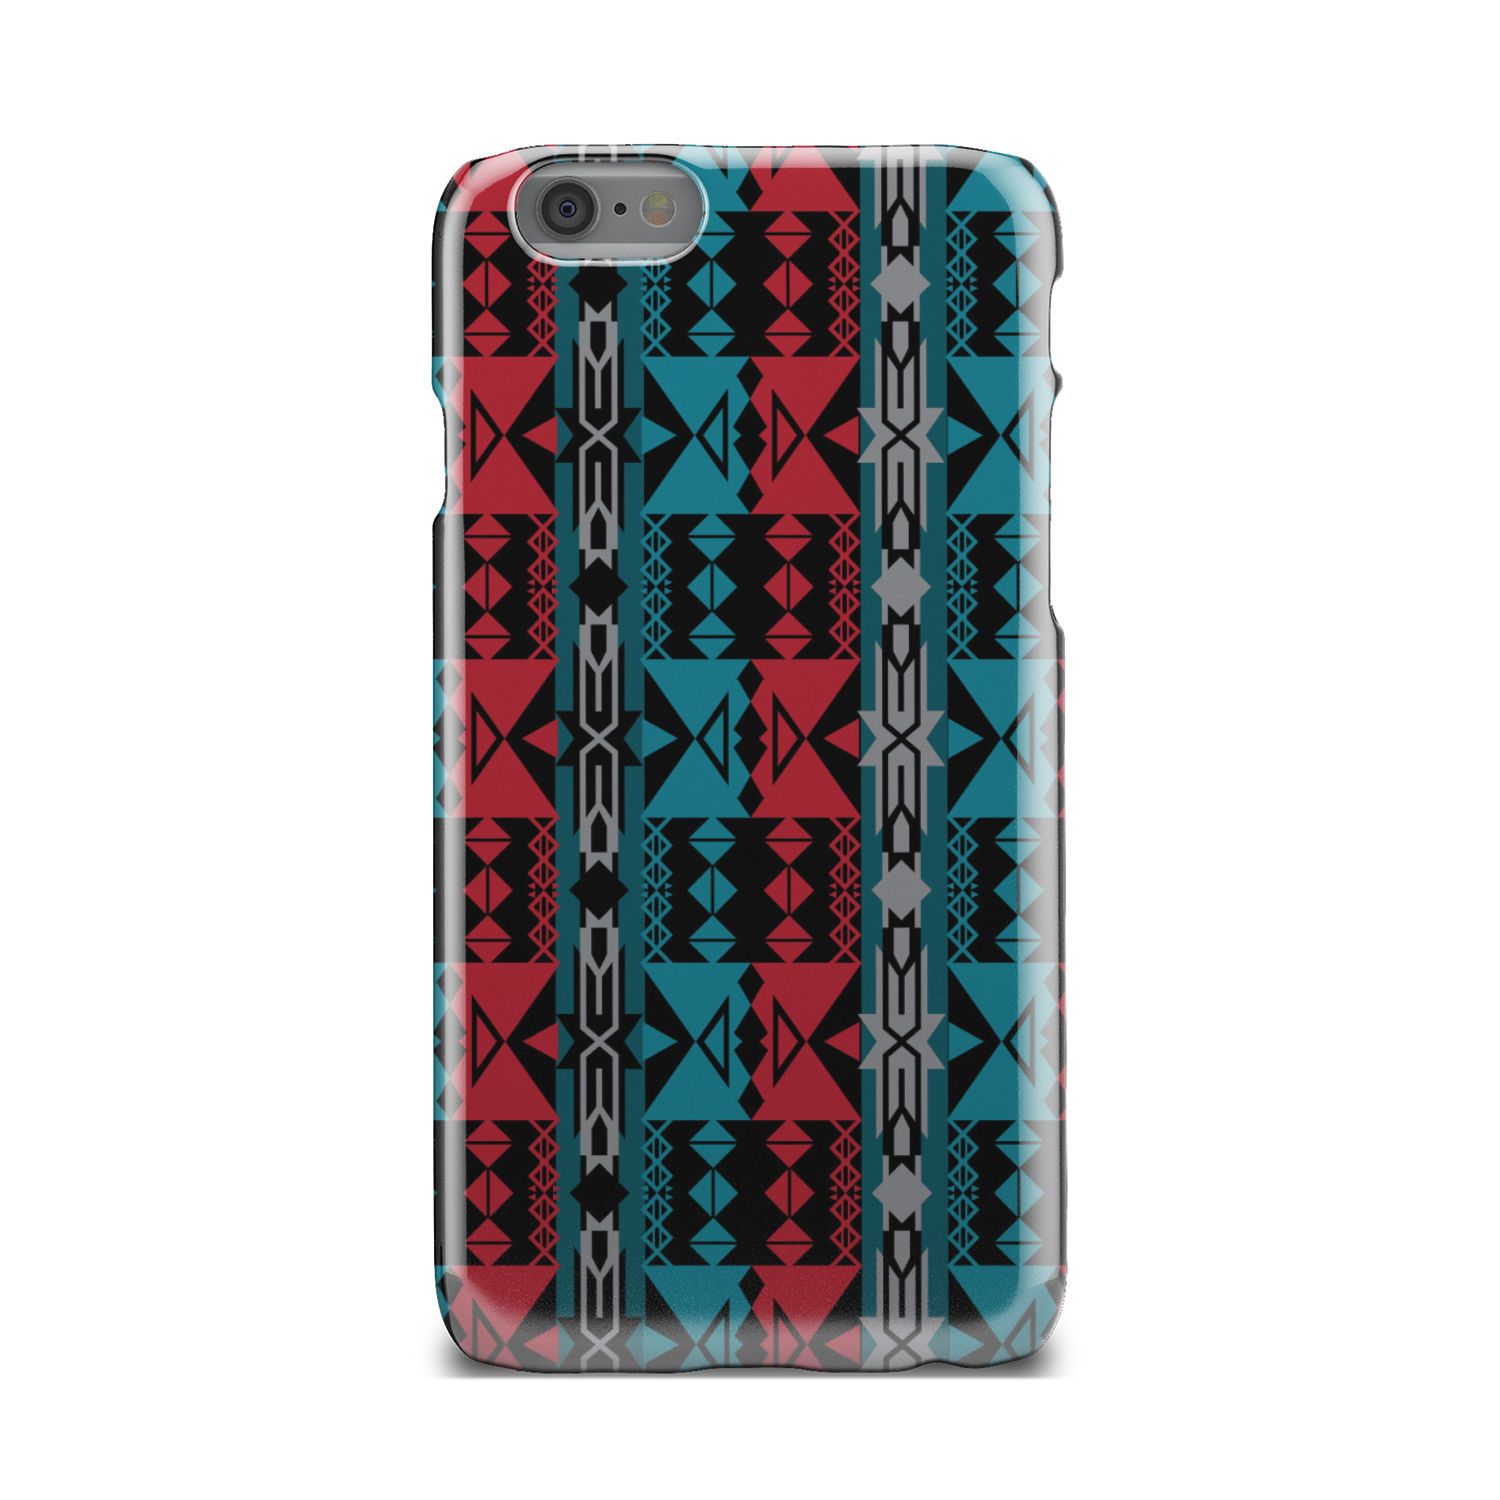 Inside the Lodge Phone Case Phone Case wc-fulfillment iPhone 6s 